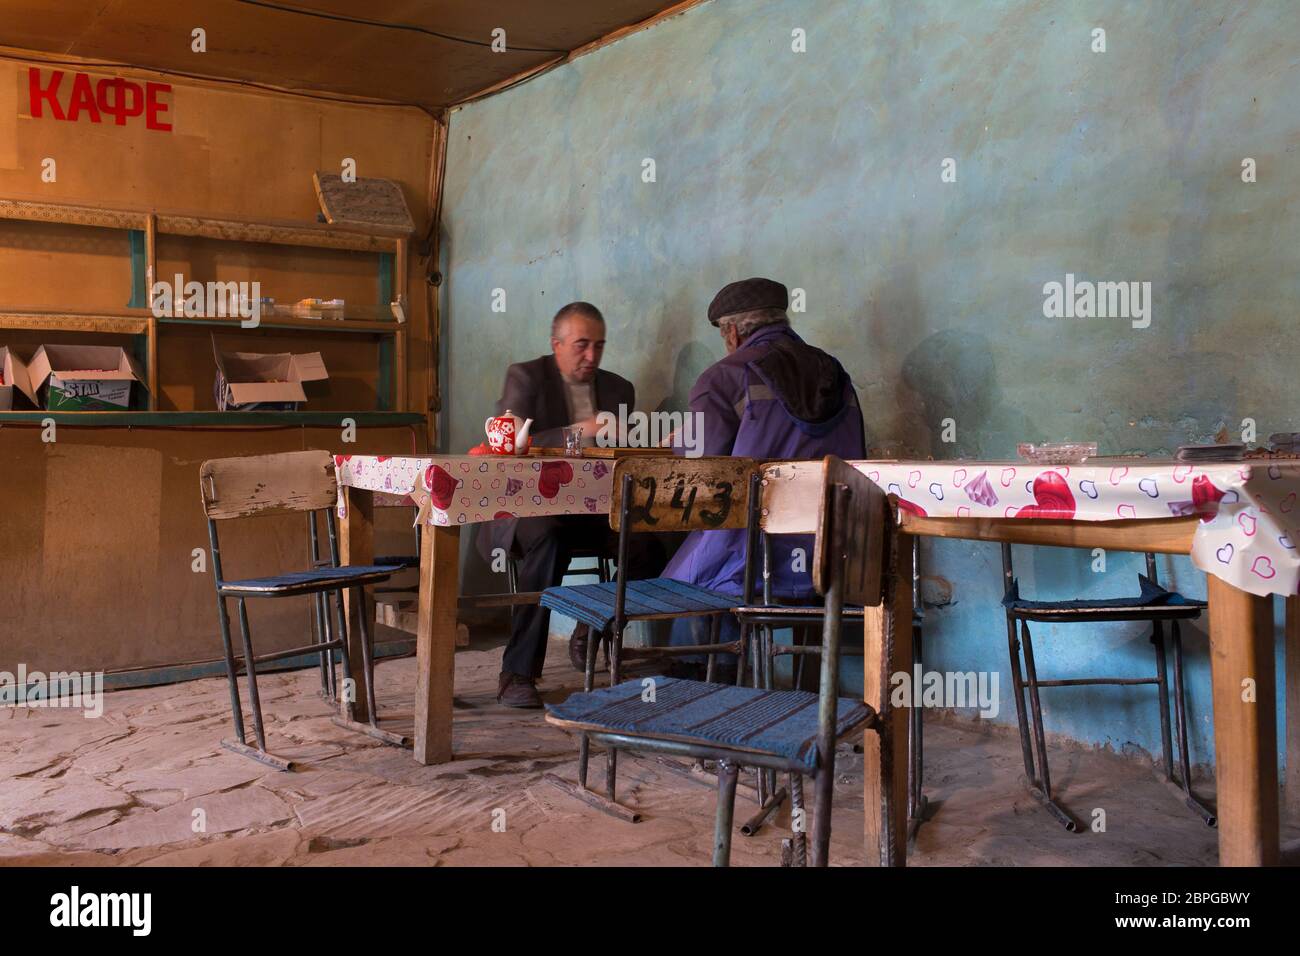 Men in the village of Lahic gather in the tea shop to meet and play dominos while drinking tea and smoking cigarettes in Lahic Azerbaijan. Stock Photo